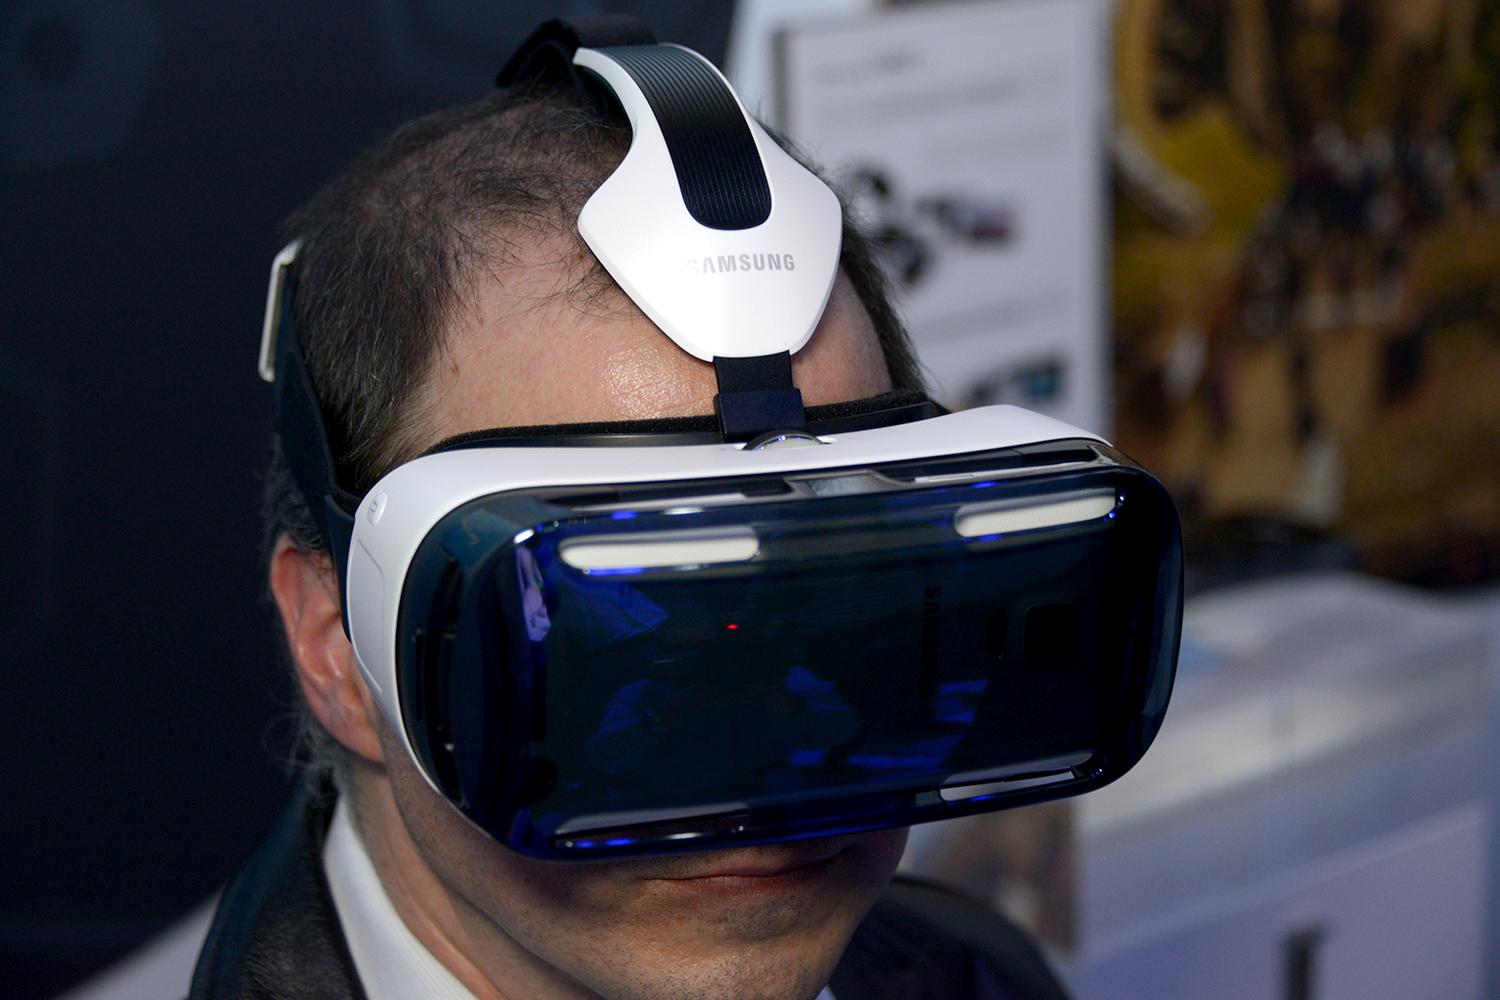 Samsung's $200, Gear VR Virtual Reality Headset Out Now | Digital